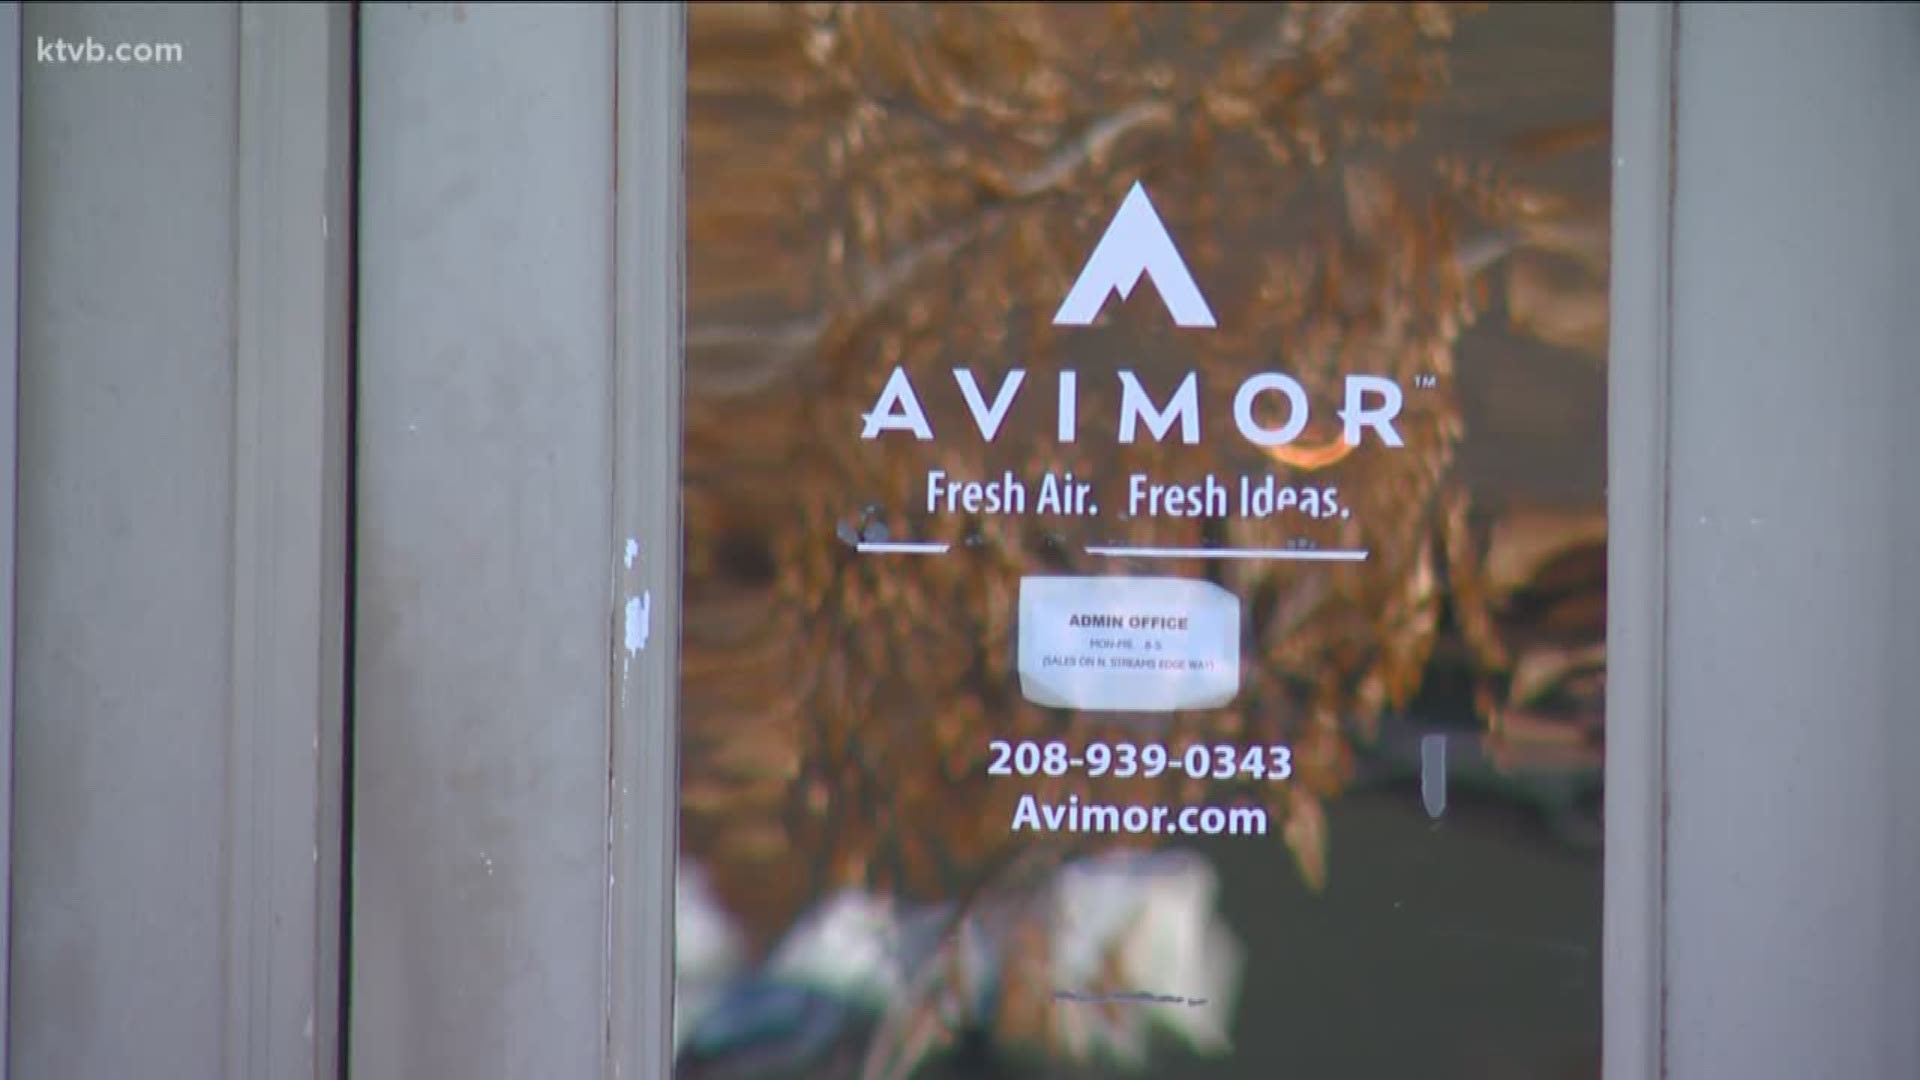 Avimor has planned for years to be annexed into the City of Eagle, but now the city is trying to change its comprehensive plans on if the community will be annexed.